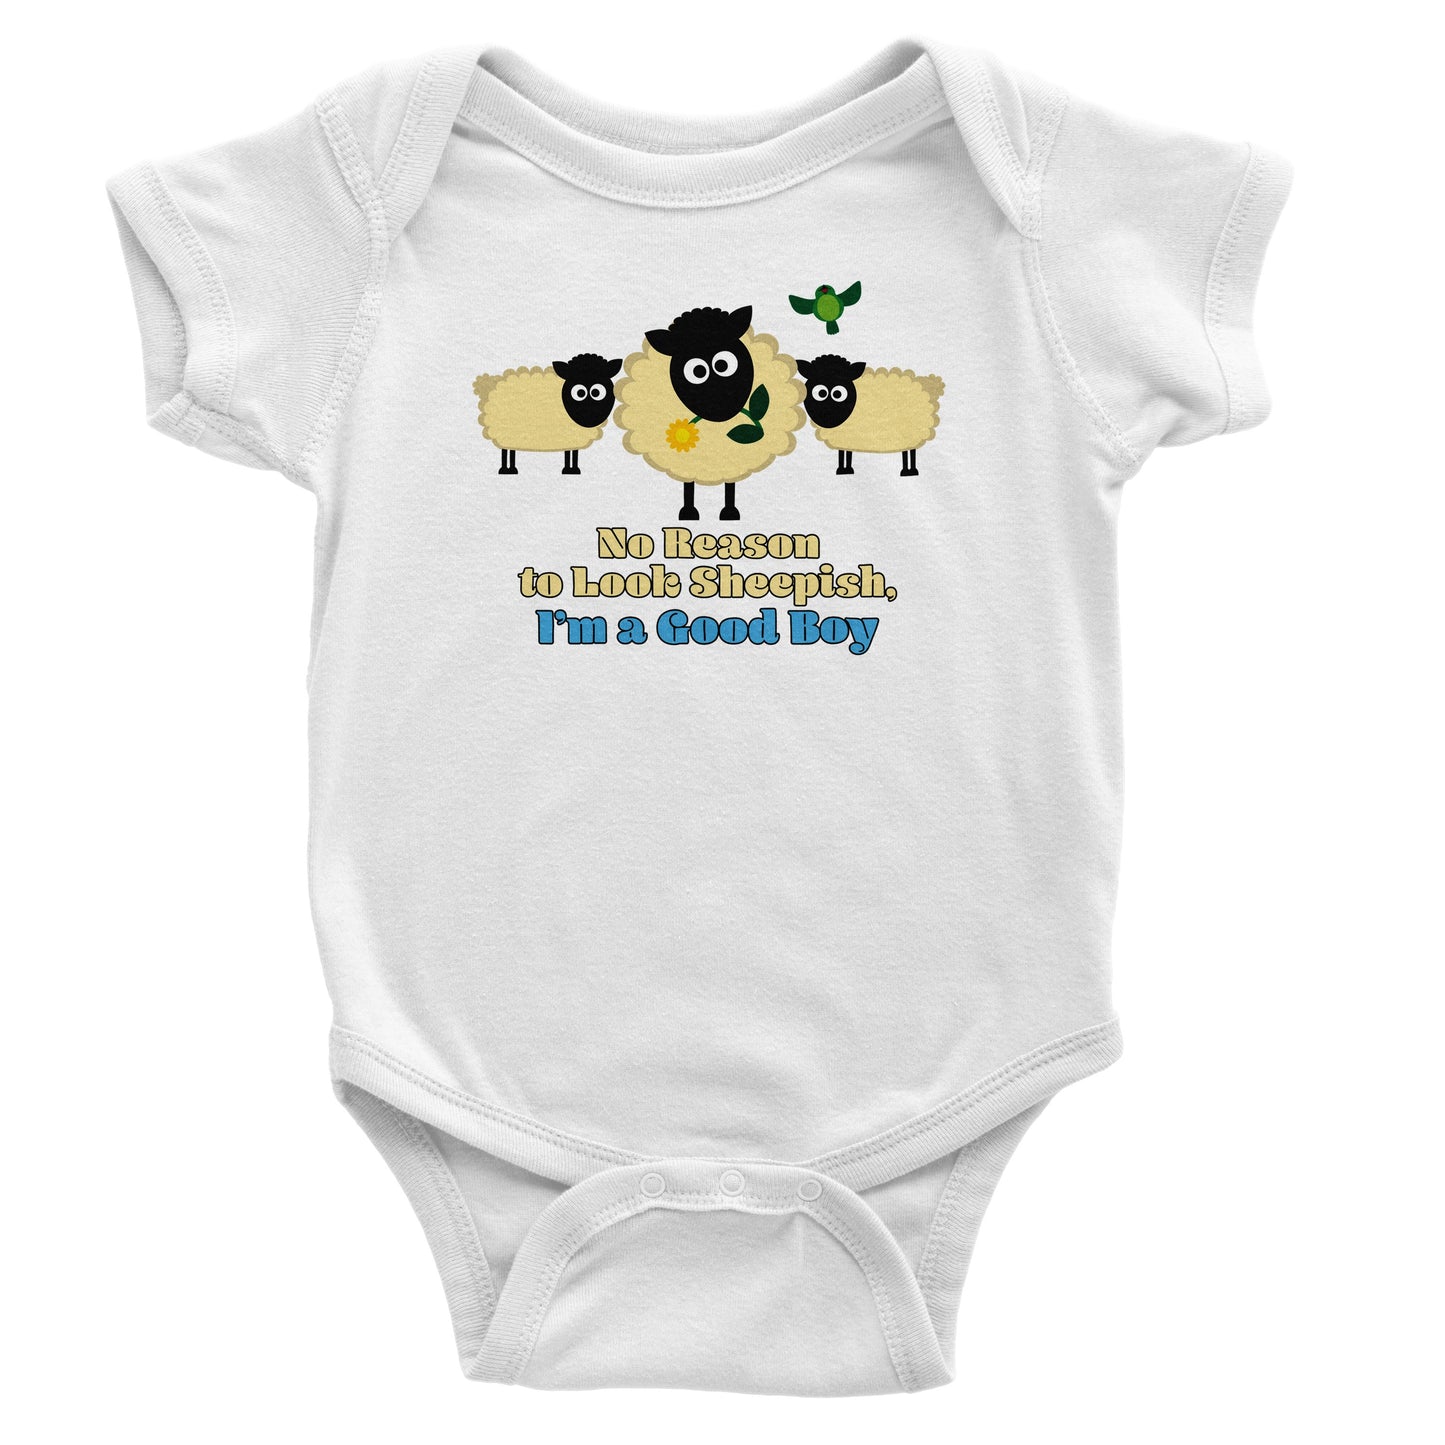 Babies Happy Sheep Bodysuit from the Farm Yard Collection